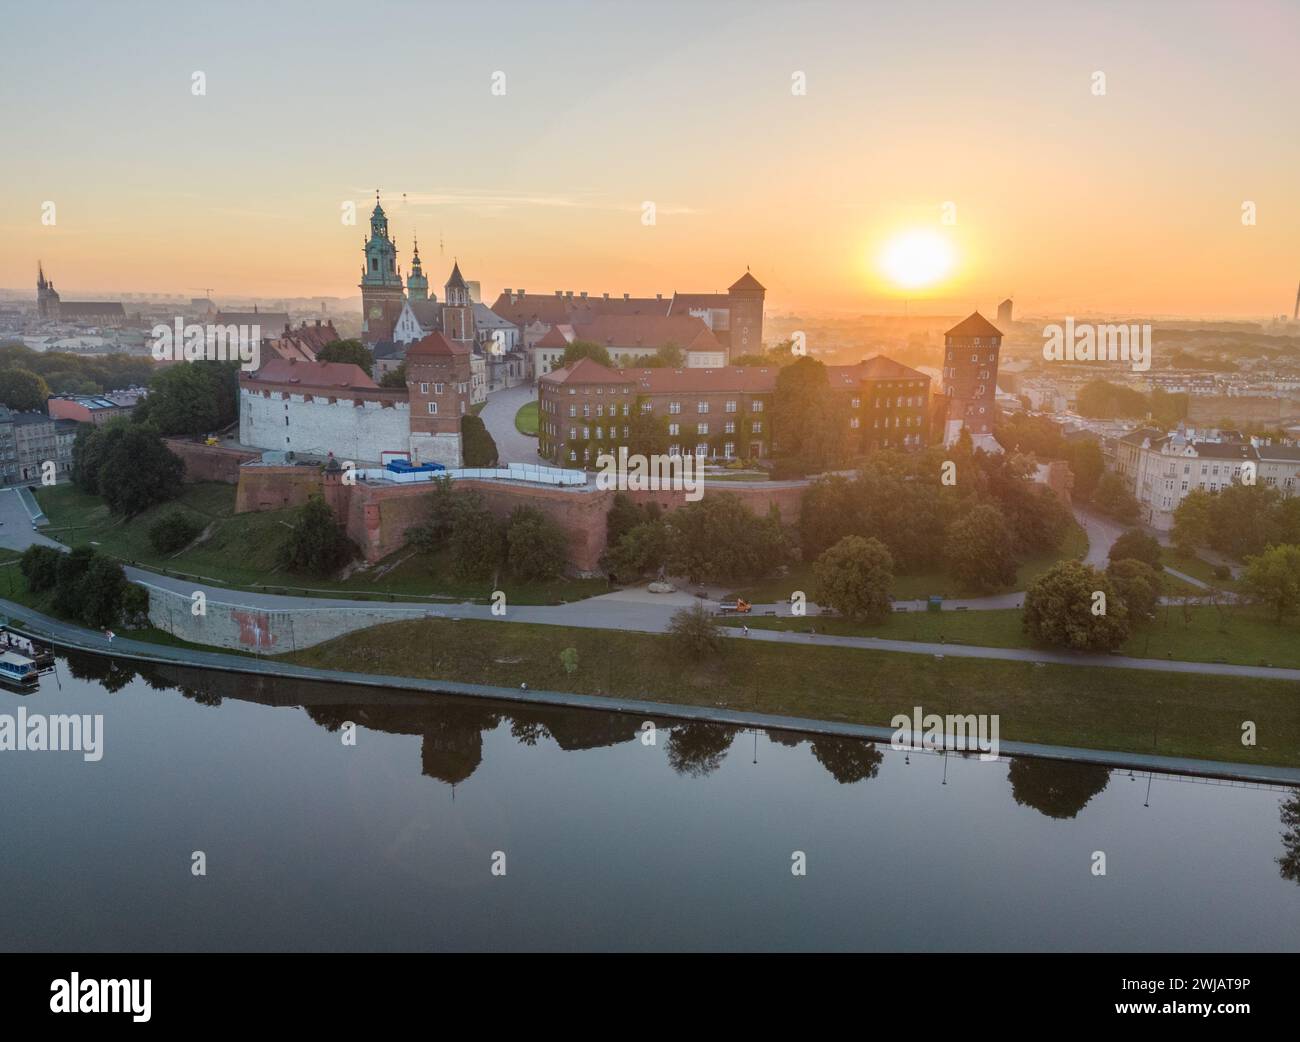 Stunning arial image of Wawel Castle in Krakow, Poland as the sin rises on a beautiful summer morning Stock Photo